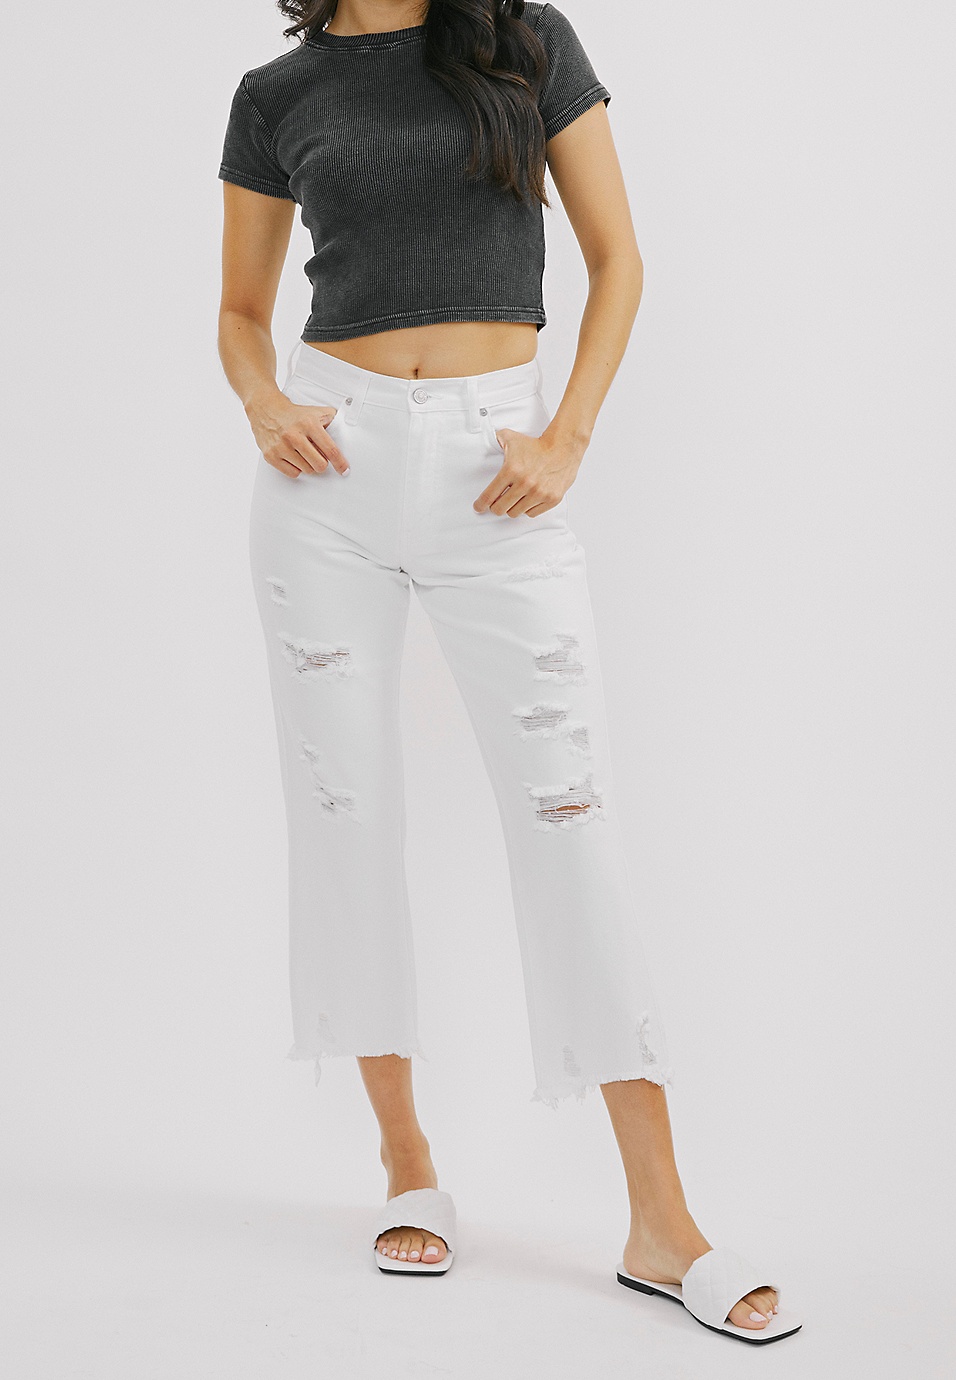 vedlægge punktum emne KanCan™ Straight Cropped Nonstretch High Rise Ripped White Jean | maurices